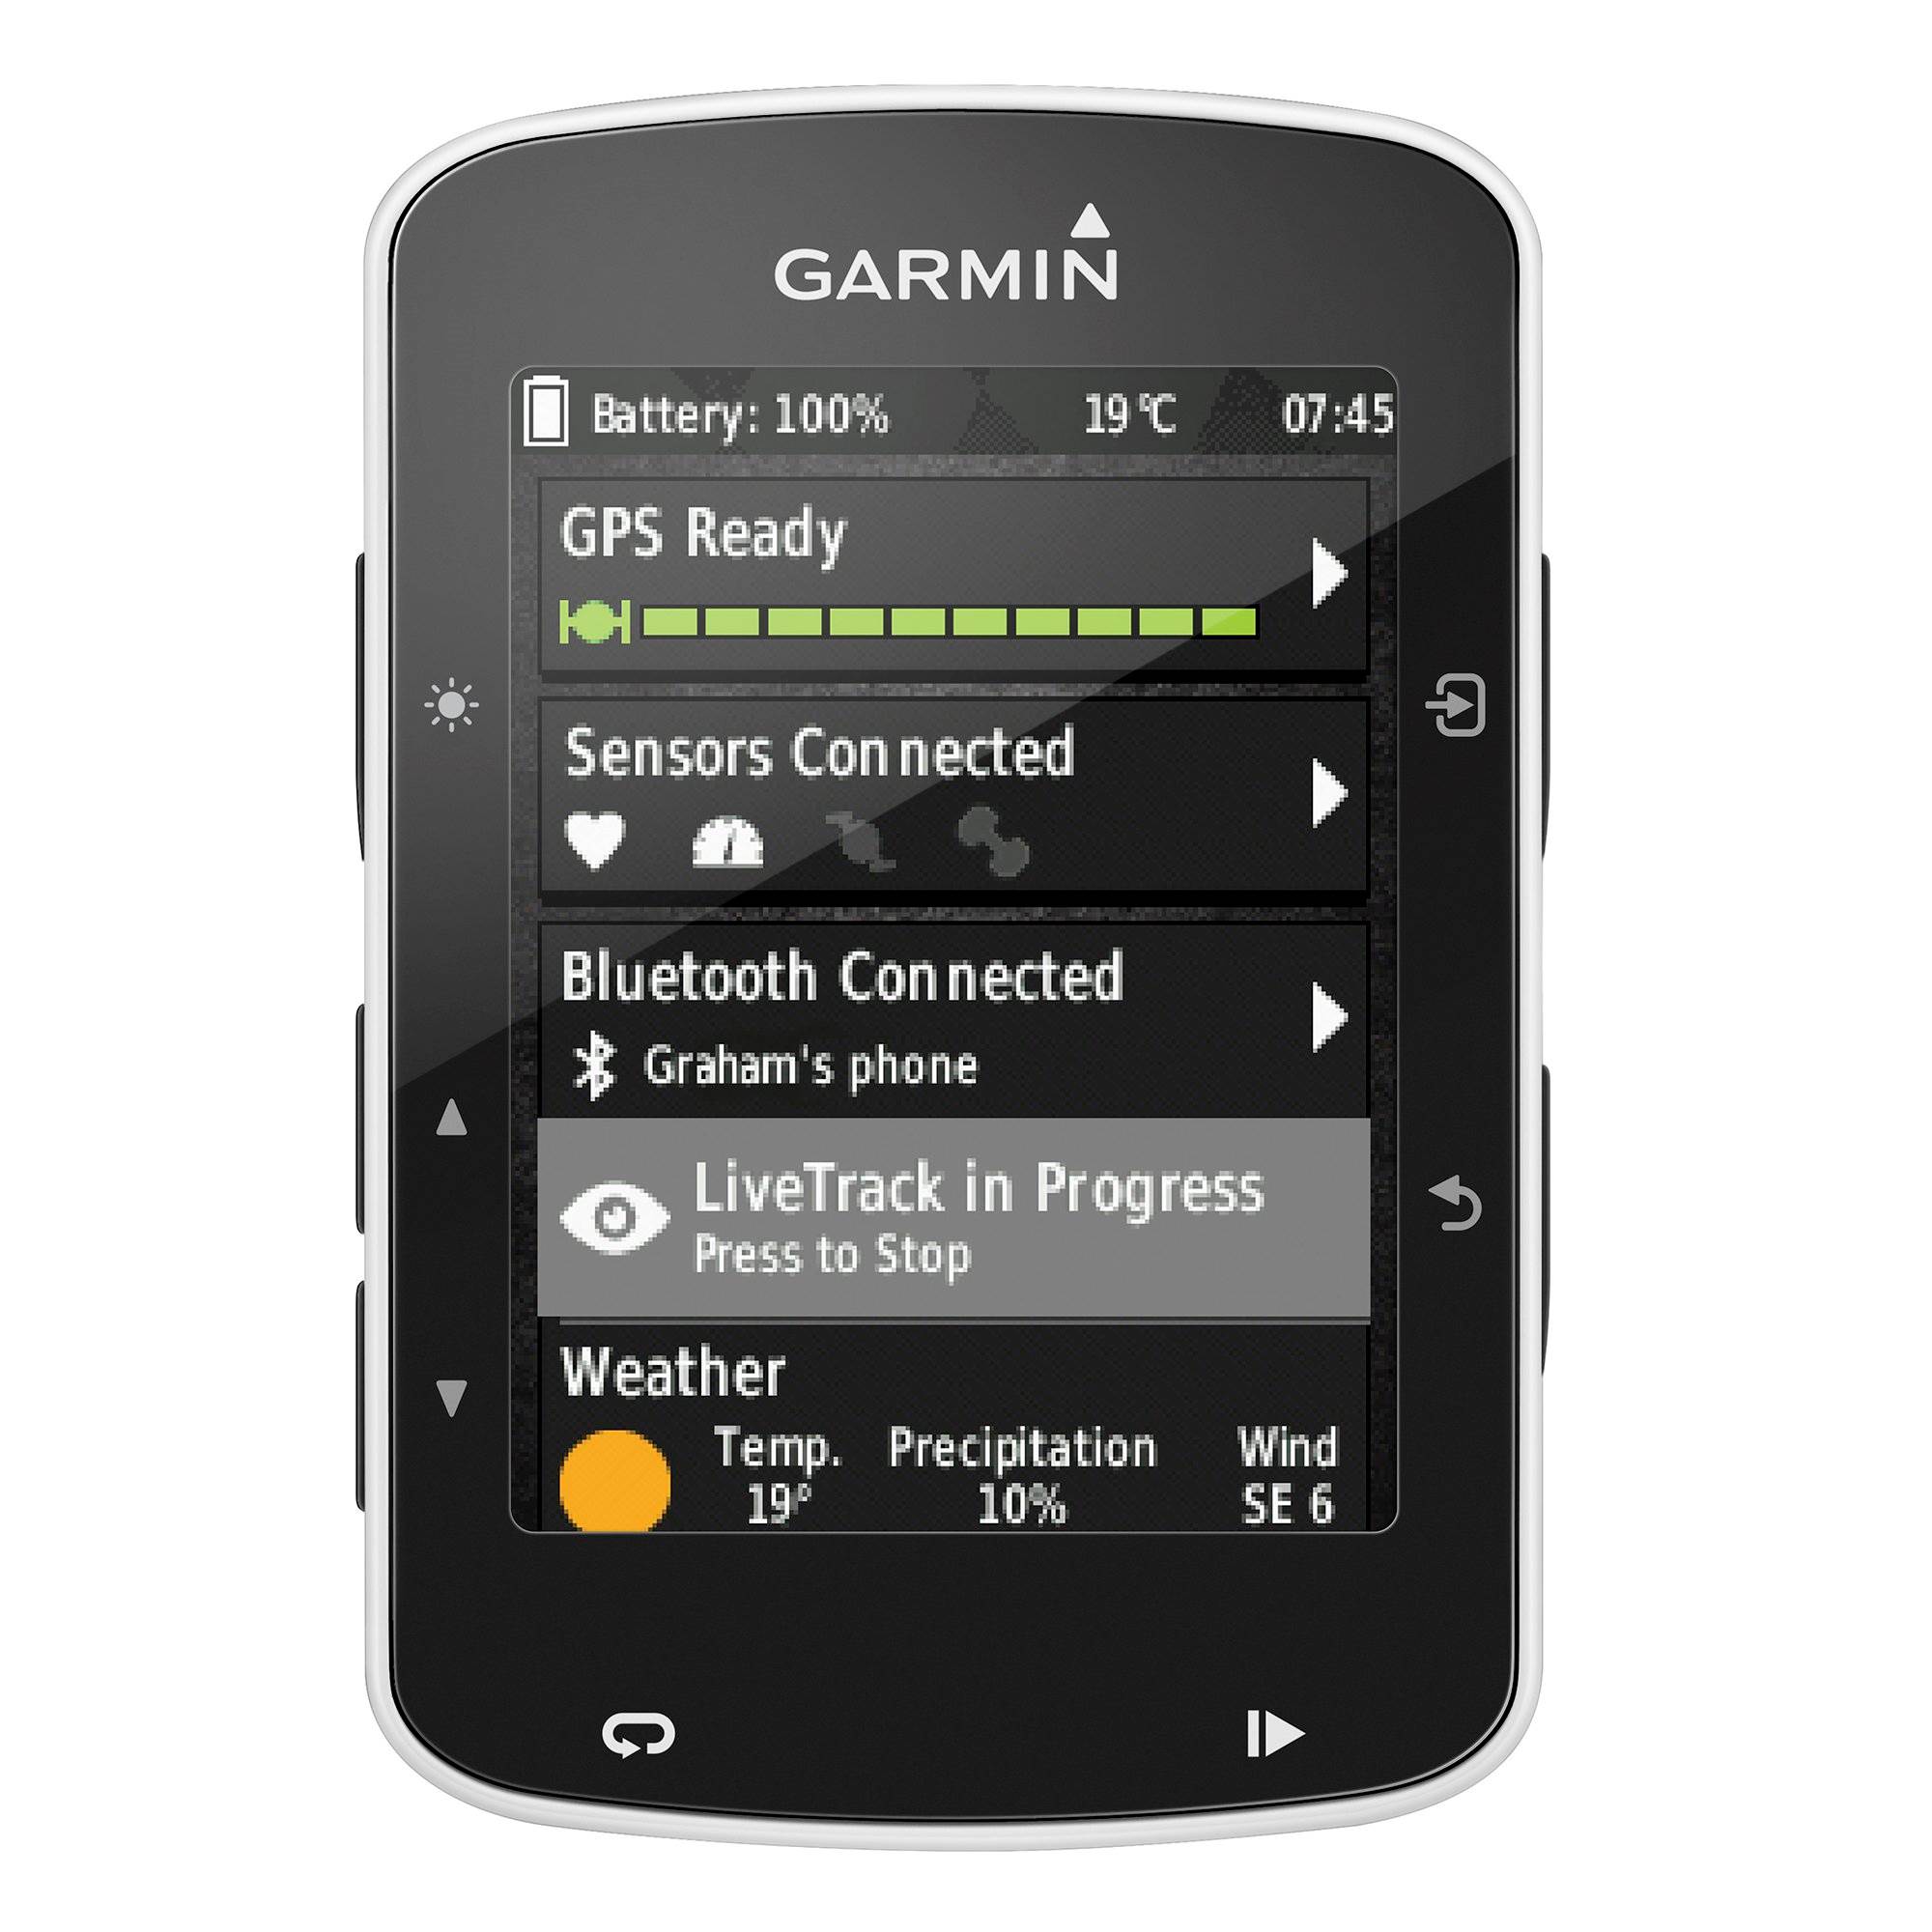 Garmin Edge 520 ANT+ & Strava Connected Bike Mount Cycling GPS Training Computer - image 2 of 8